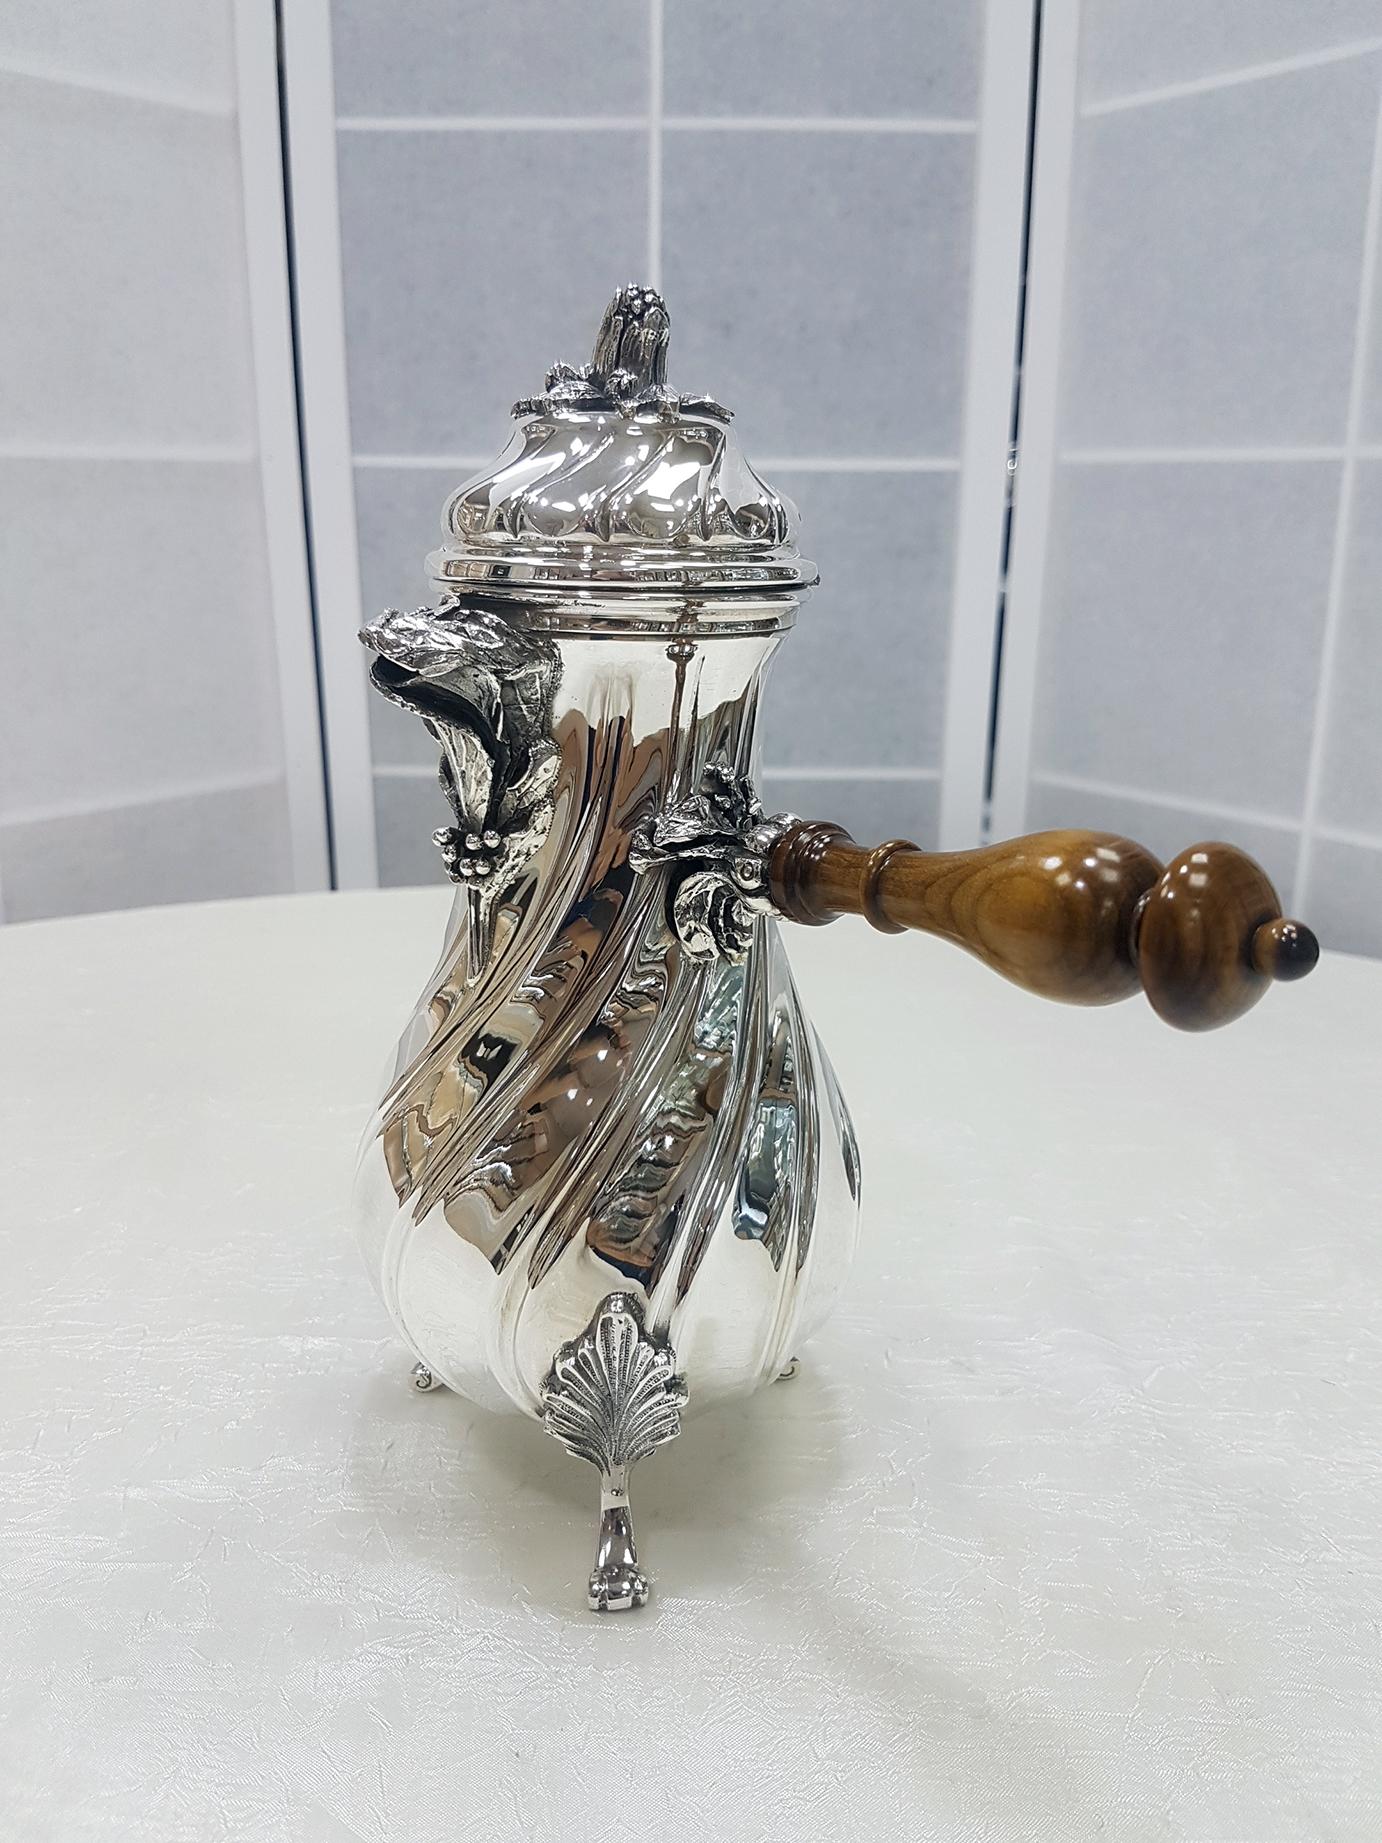 Solid silver chocolate pot in Baroque style with feet. The spiral work makes it very bright due to the faces that mirror each other. 
The body of the chocolate pot is supported by 3 feet made with the 